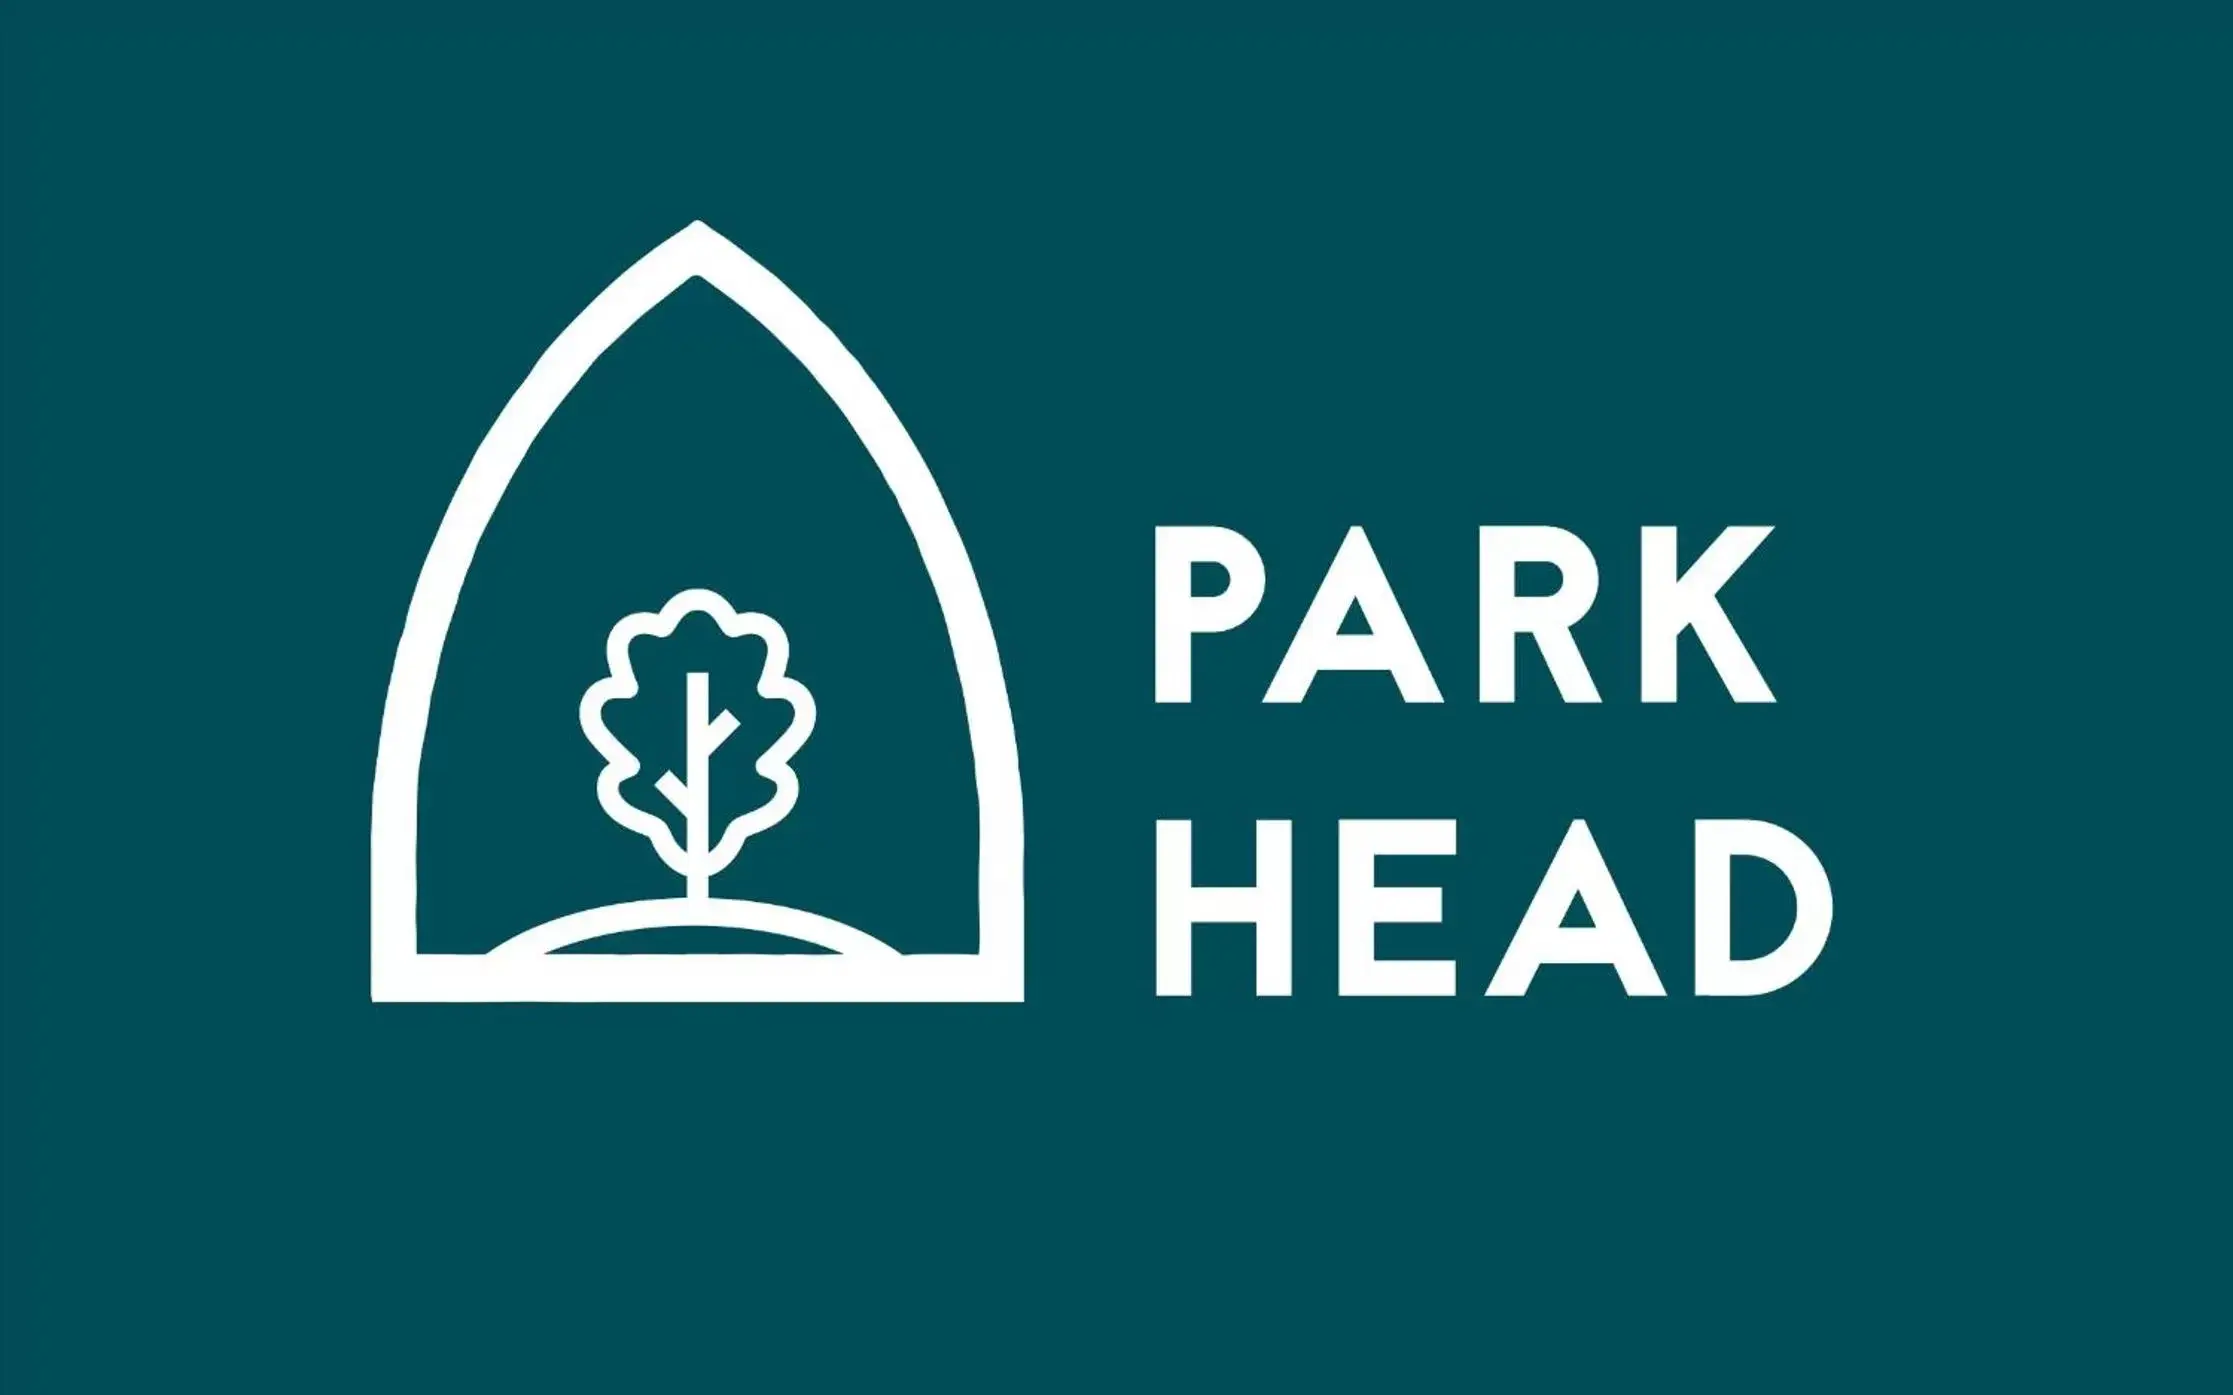 Logo/Certificate/Sign, Property Logo/Sign in Park Head Hotel